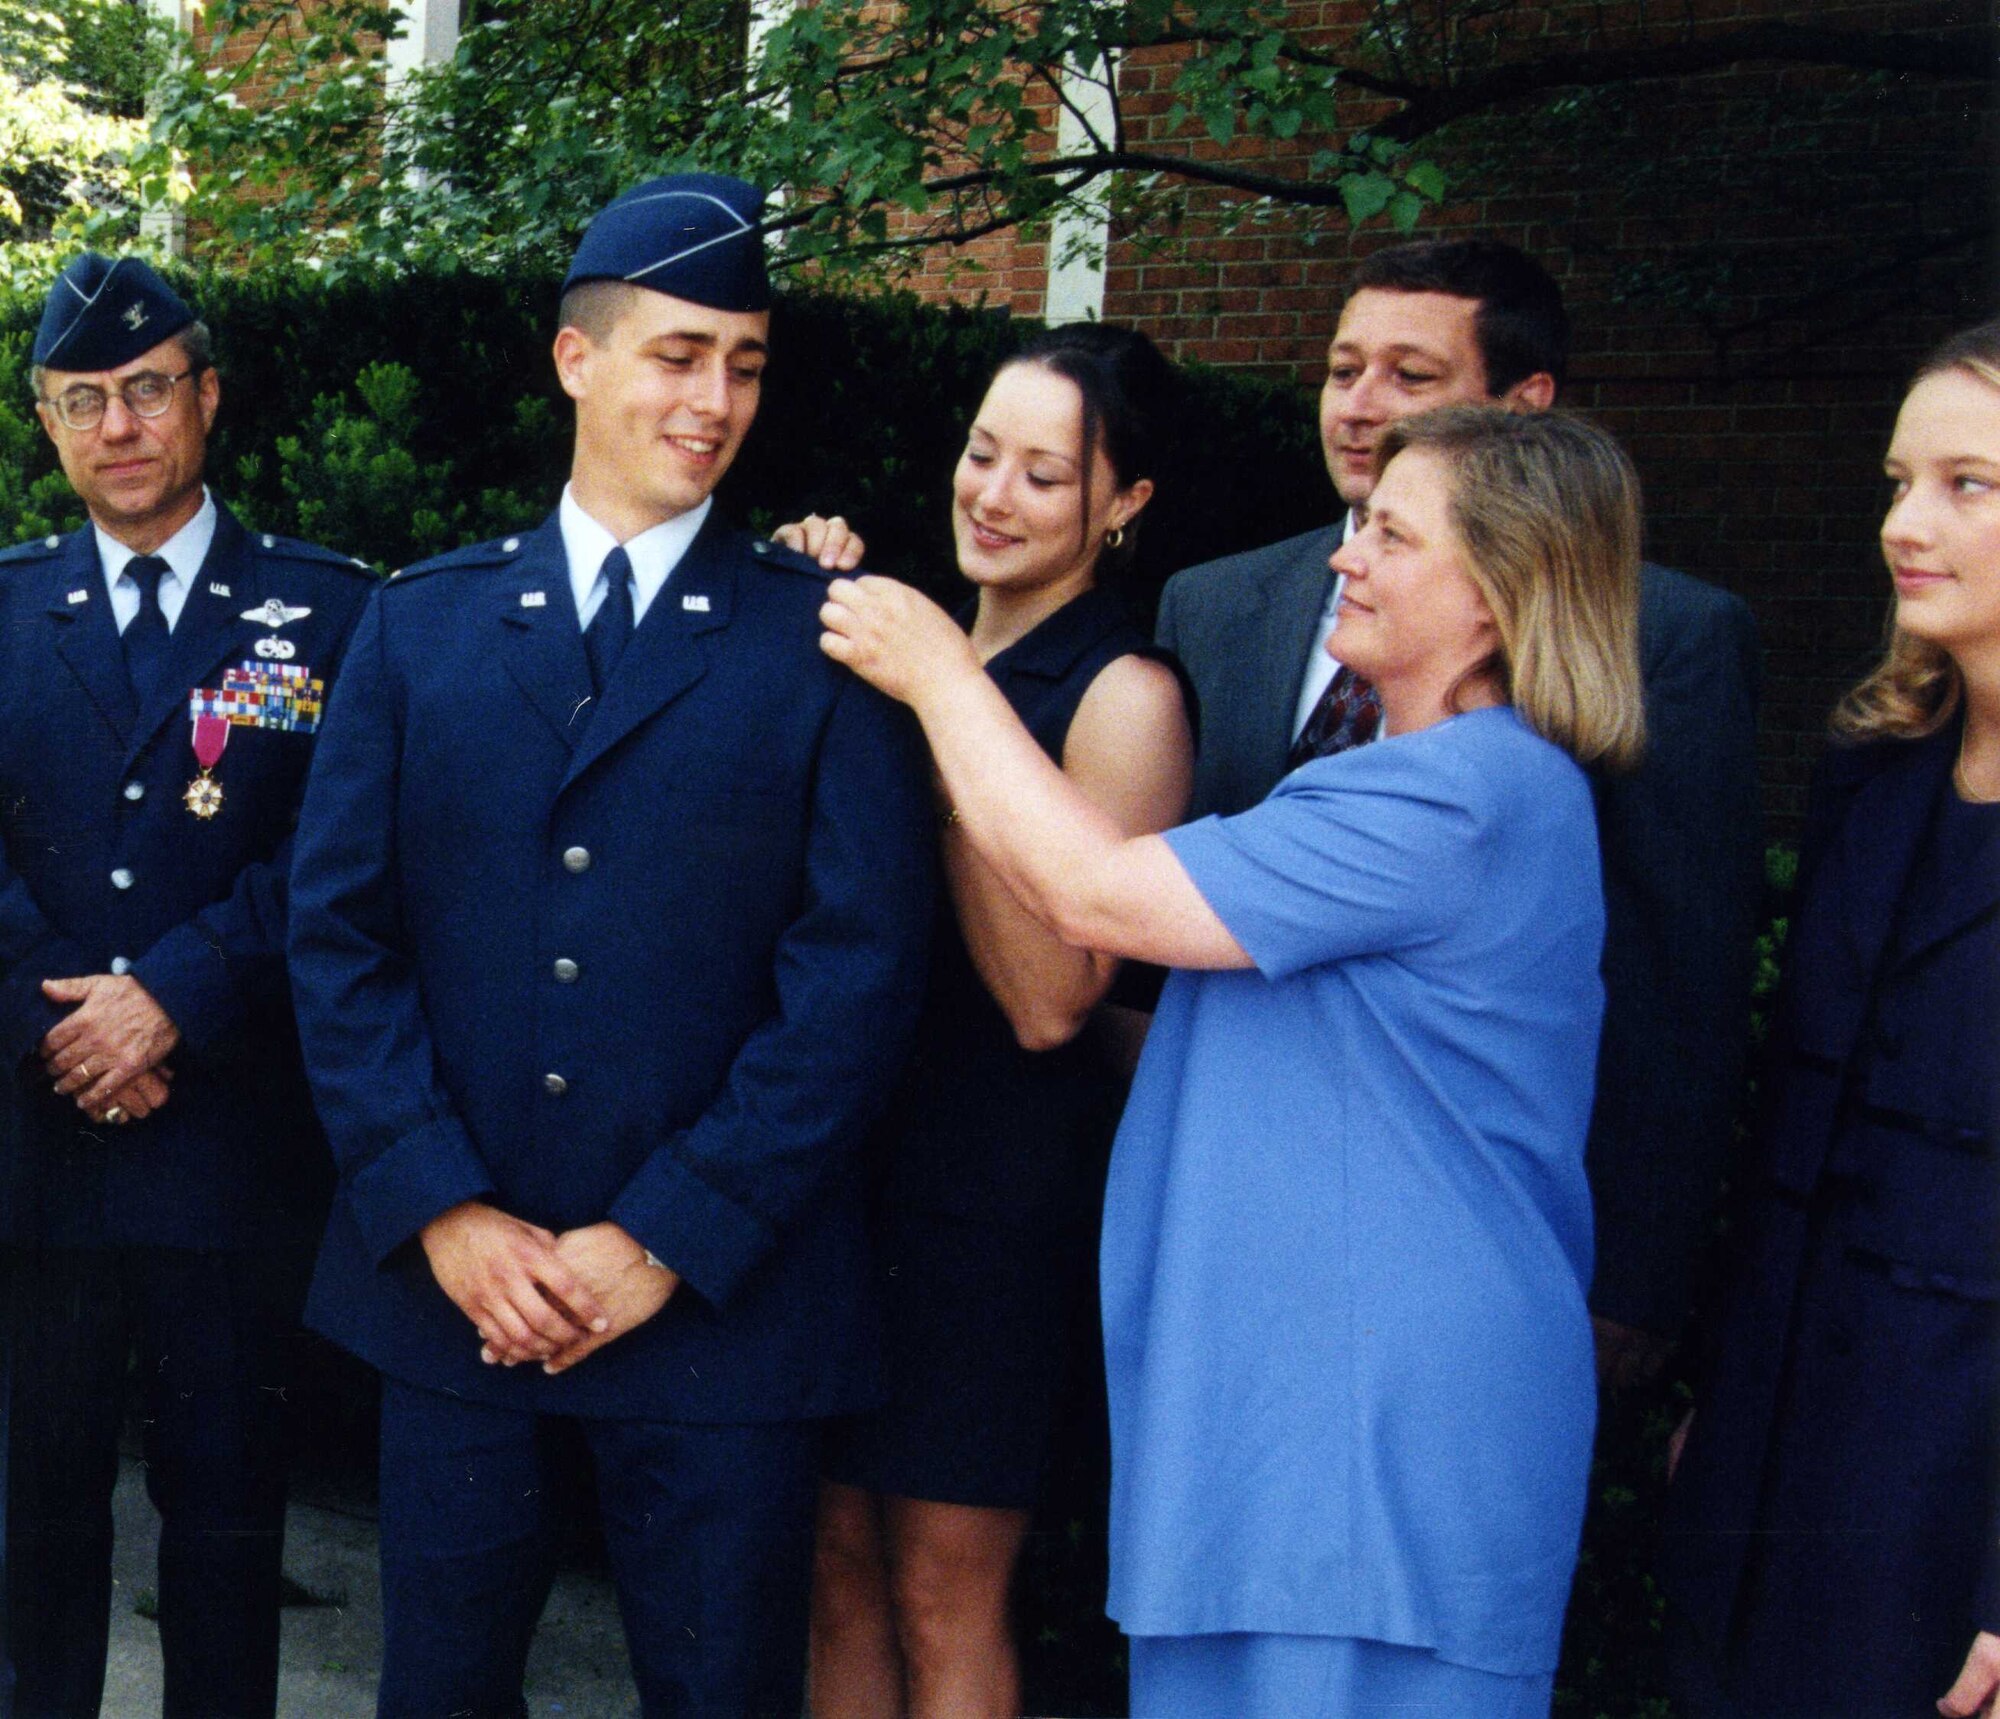 Col. Richard Evans, West Virginia University aerospace science professor and Detachment 915 commander, looks on as 2nd Lt. Dan Cooley, WVU ROTC graduate, gets a gold bar pinned on by his wife, Terese, his father, Chuck, his mother, LouAnn, and his sister, Beth, during his promotion ceremony May 15, 1999.